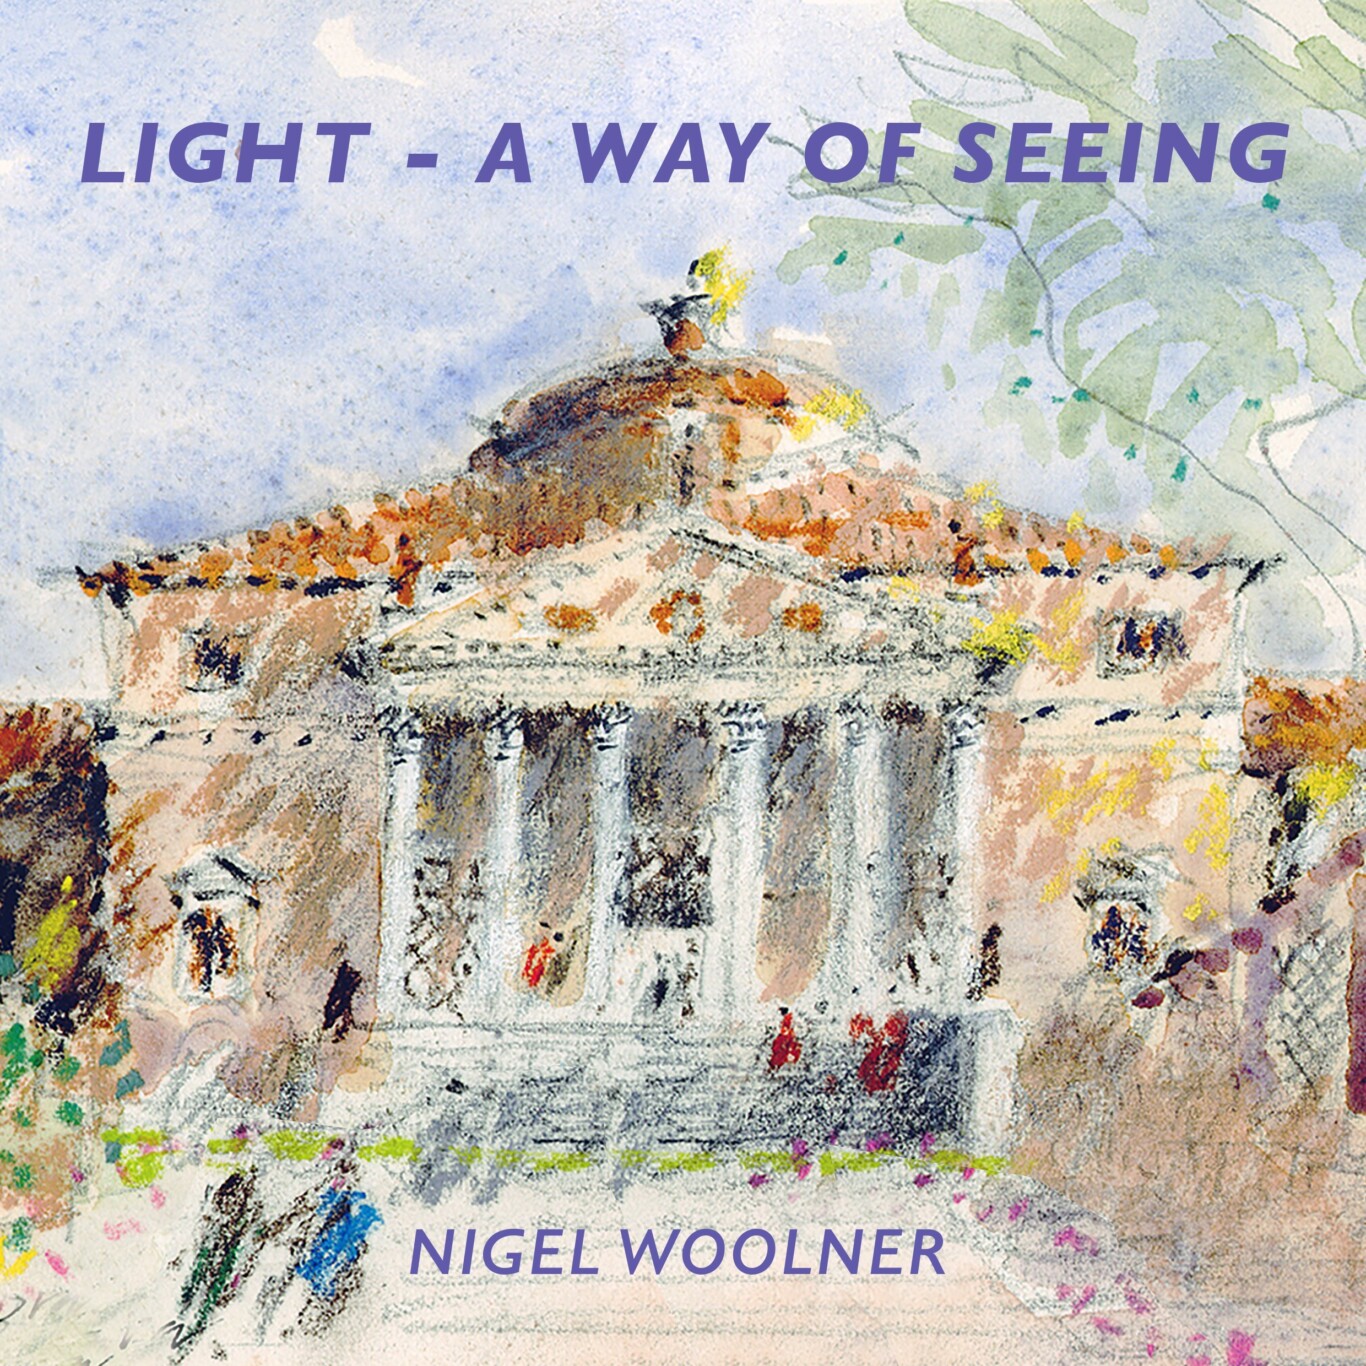 Nigel Woolner A Way Of Seeing Light Front Cover